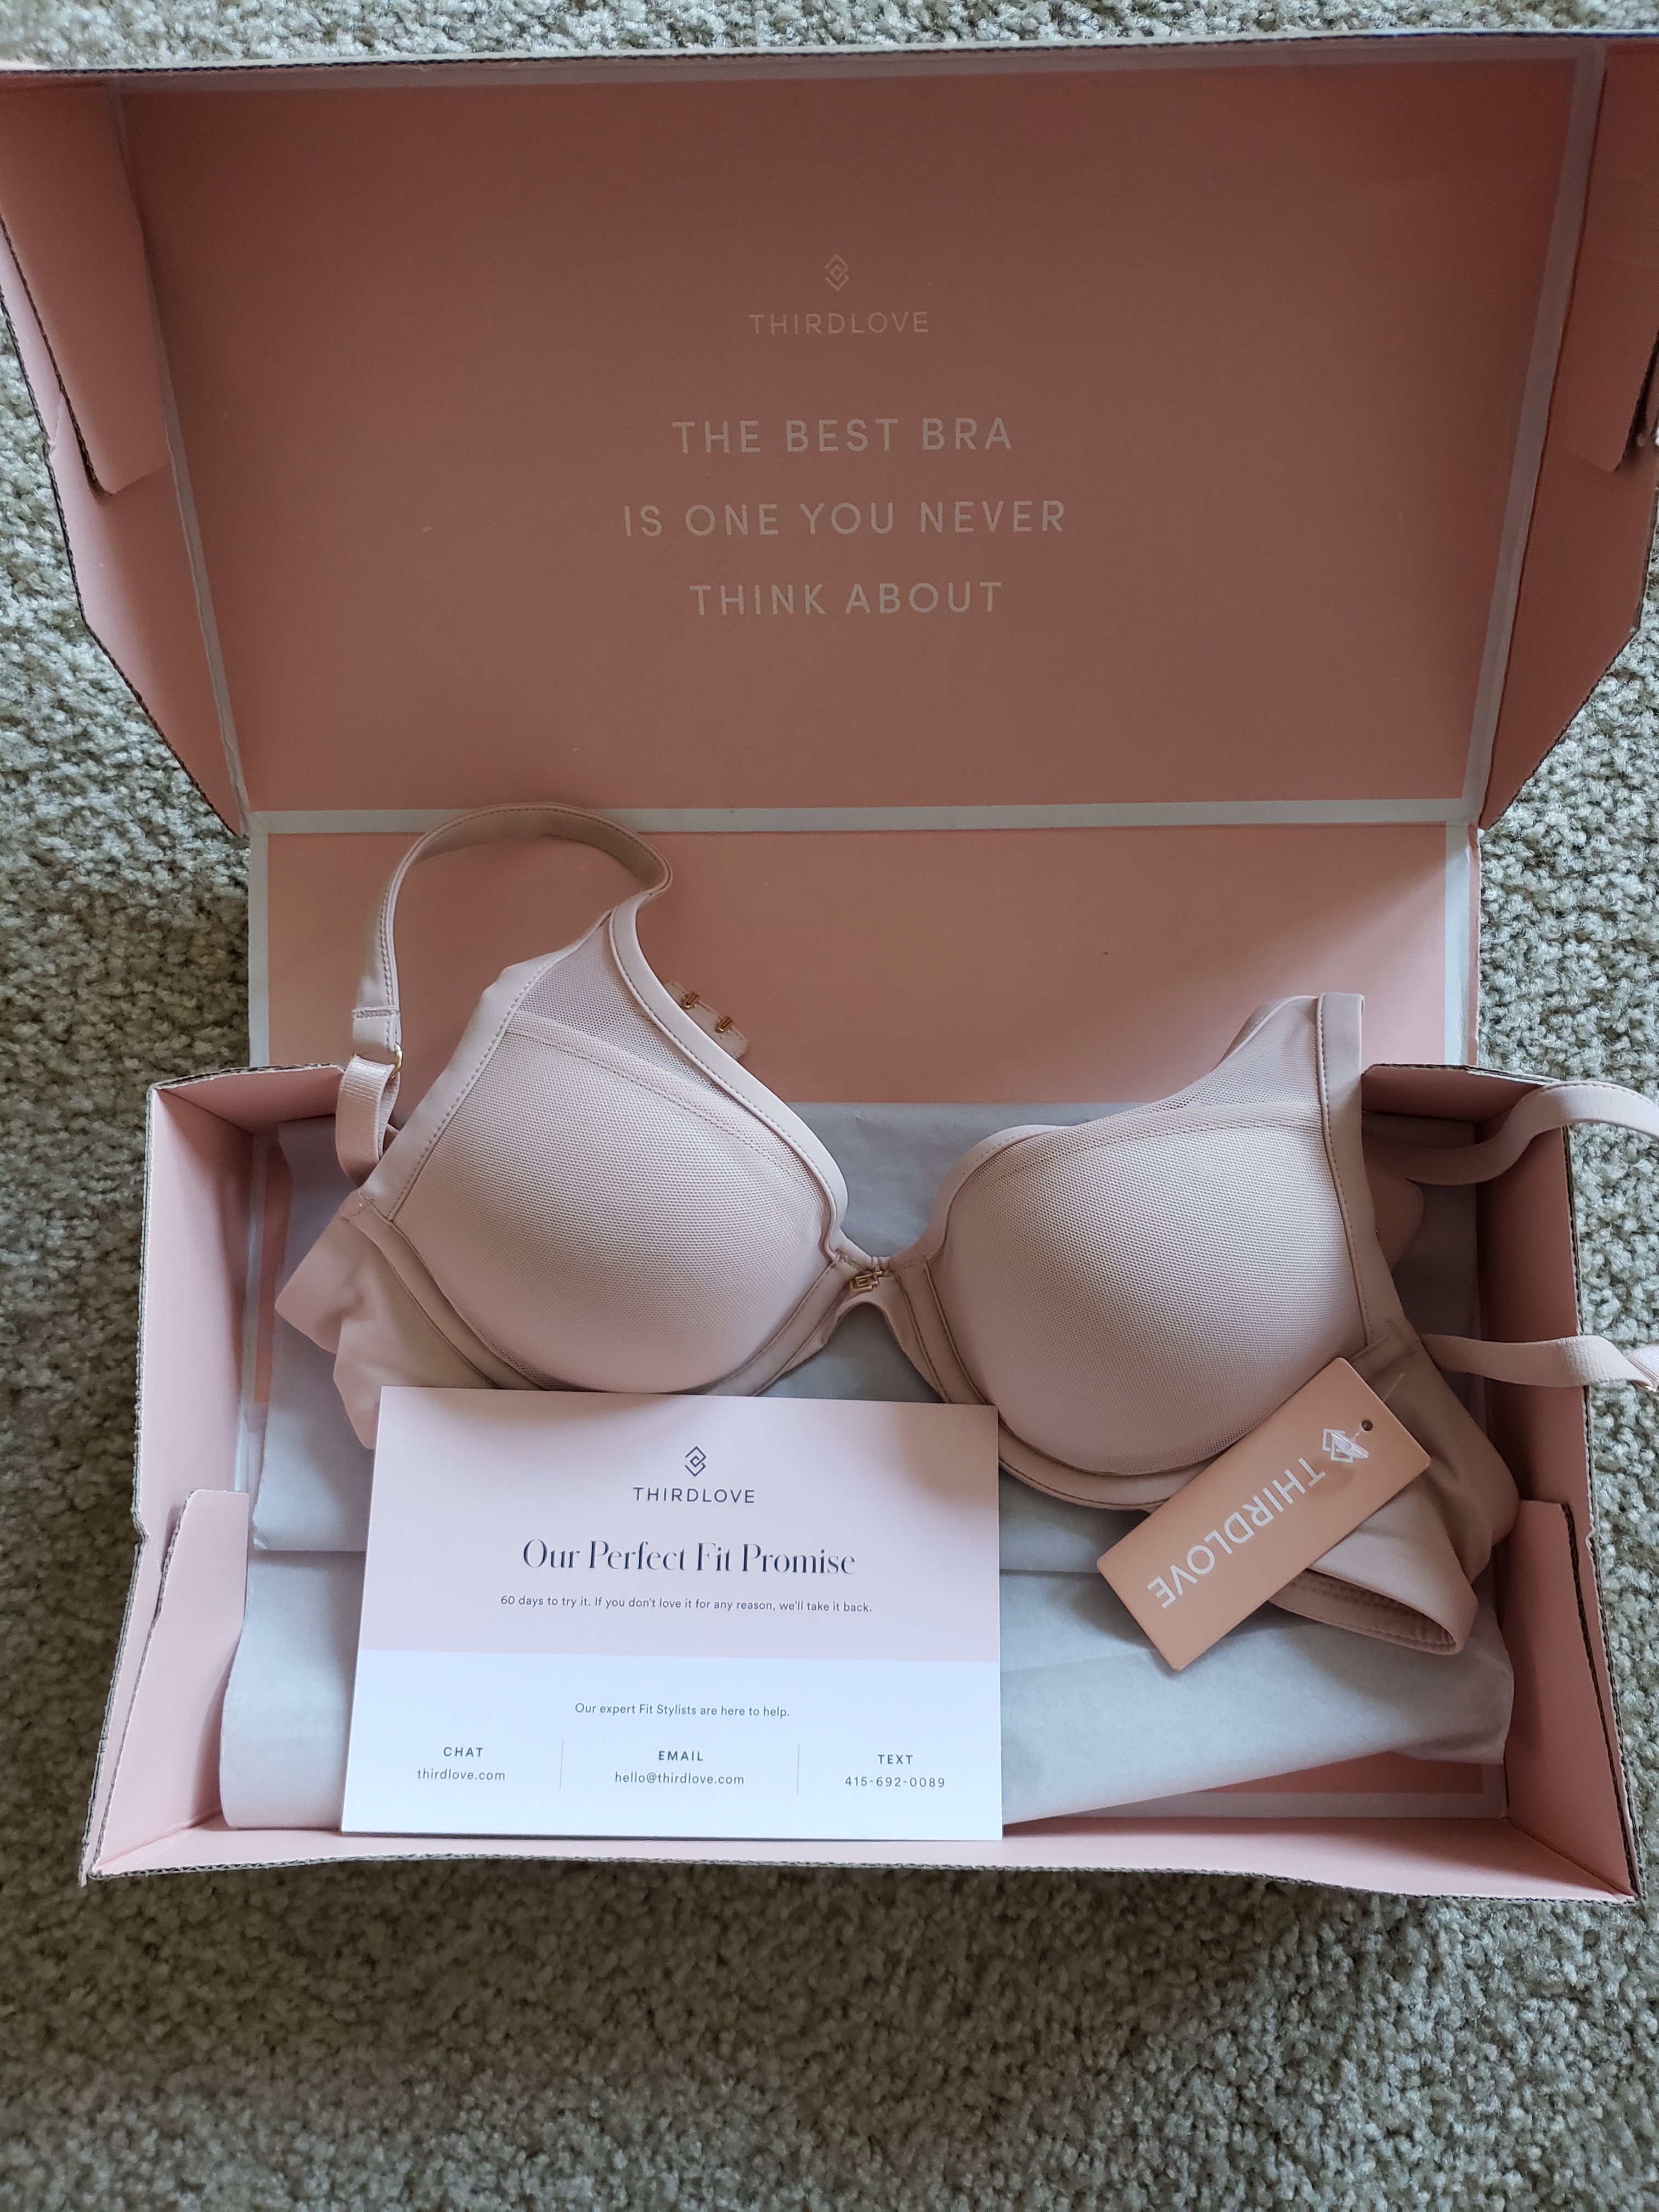 Finally, bras that fit: Pepper's love letter to the IBTC - The